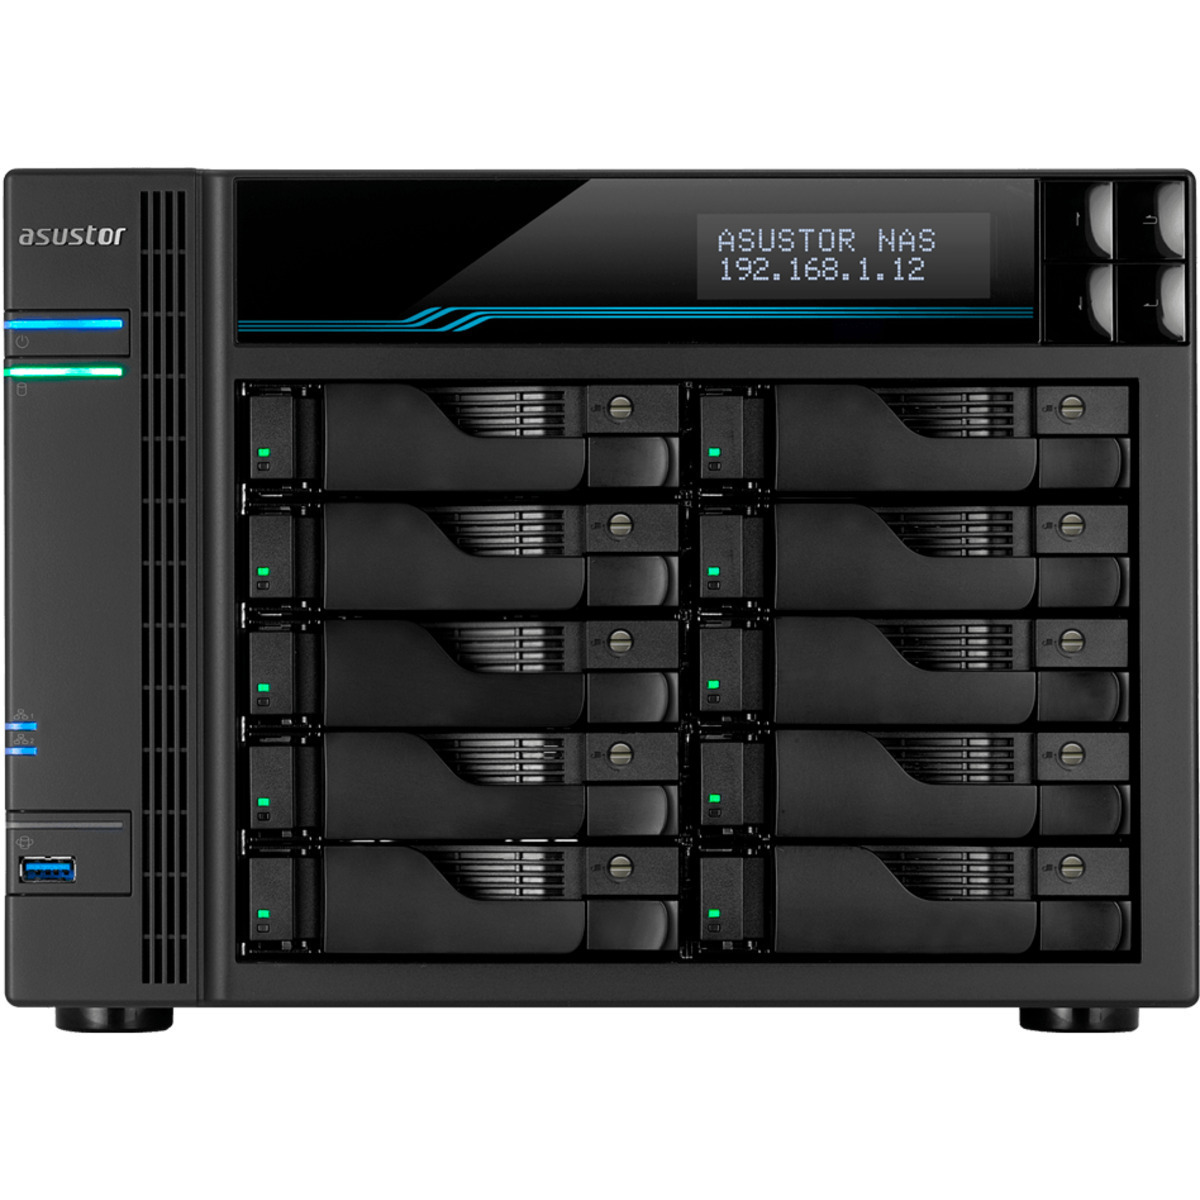 ASUSTOR AS6510T Lockerstor 10 120tb 10-Bay Desktop Multimedia / Power User / Business NAS - Network Attached Storage Device 10x12tb Western Digital Ultrastar DC HC520 HUH721212ALE600 3.5 7200rpm SATA 6Gb/s HDD ENTERPRISE Class Drives Installed - Burn-In Tested - FREE RAM UPGRADE AS6510T Lockerstor 10